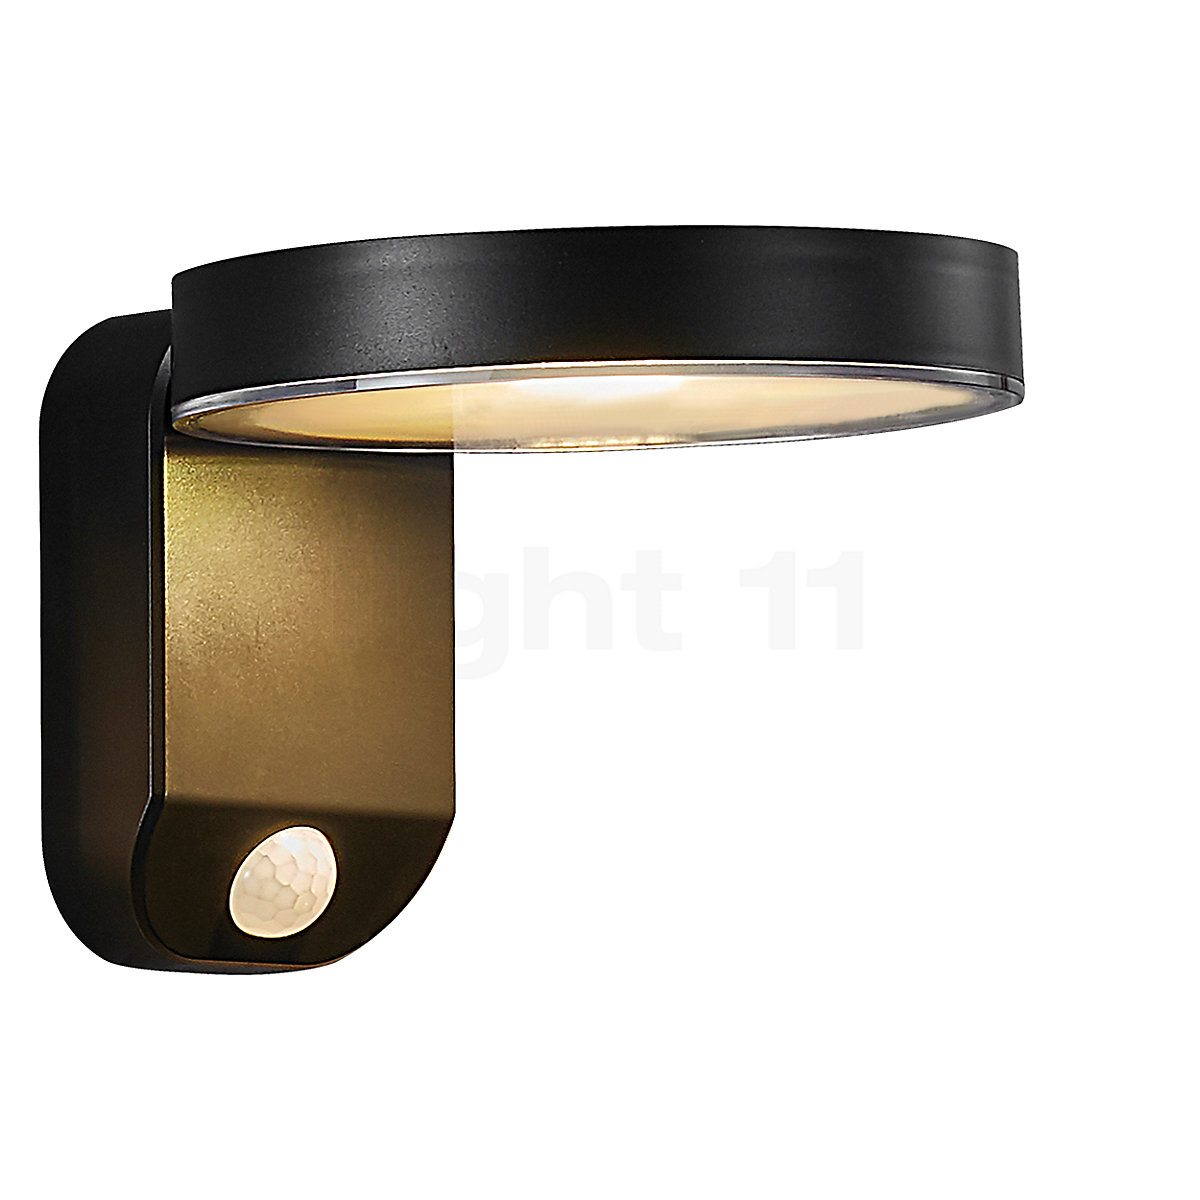 Buy Nordlux Rica Wall Light LED at solar with